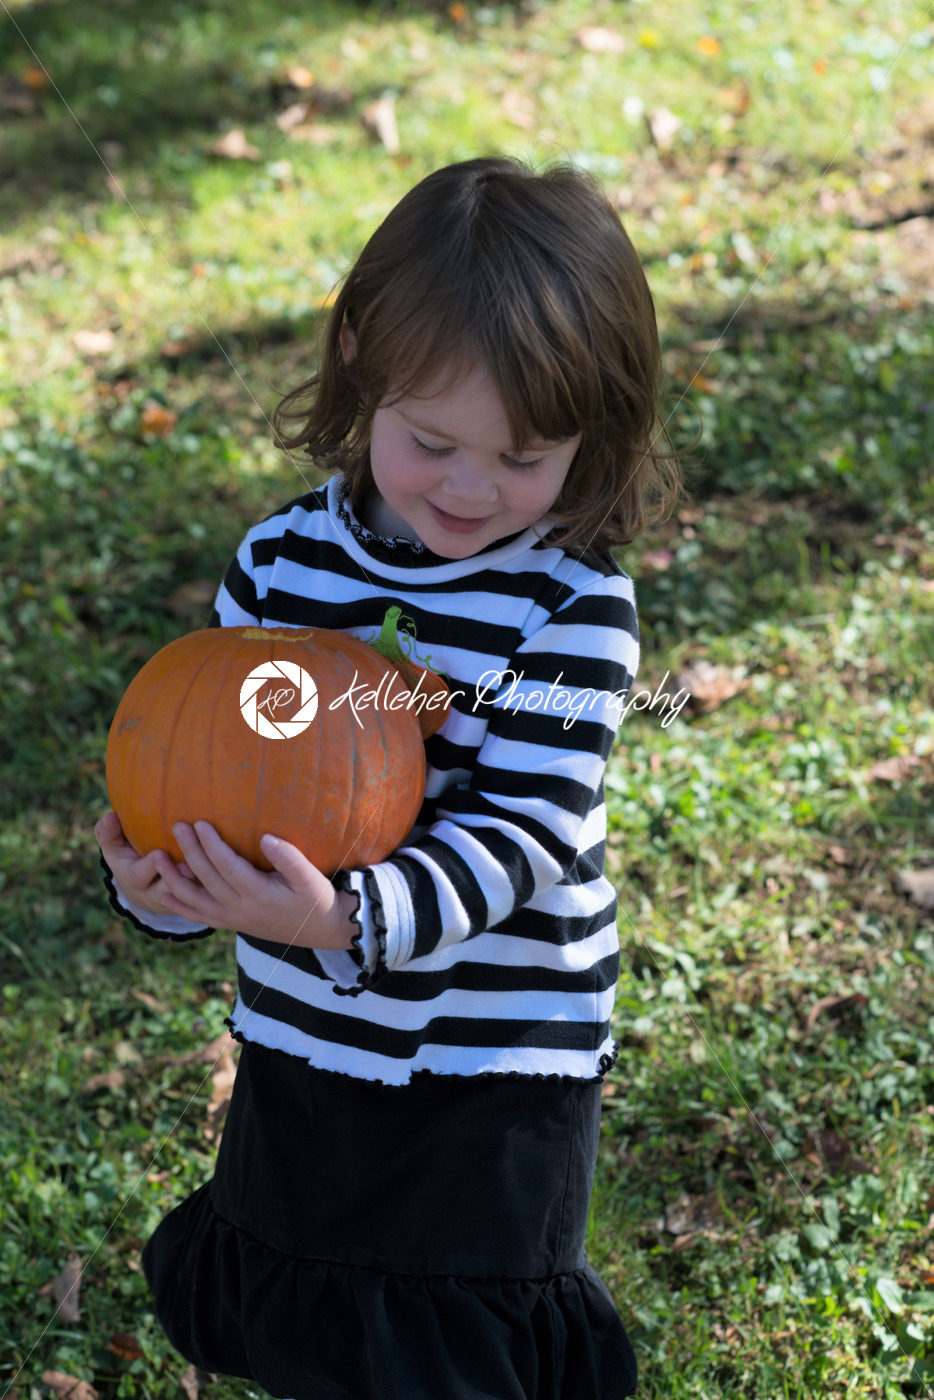 Beautiful smiling toddler girl wearing black and white Halloween outfit outdoors holding little pumpkin and smiling with grass and falling leaves in background - Kelleher Photography Store